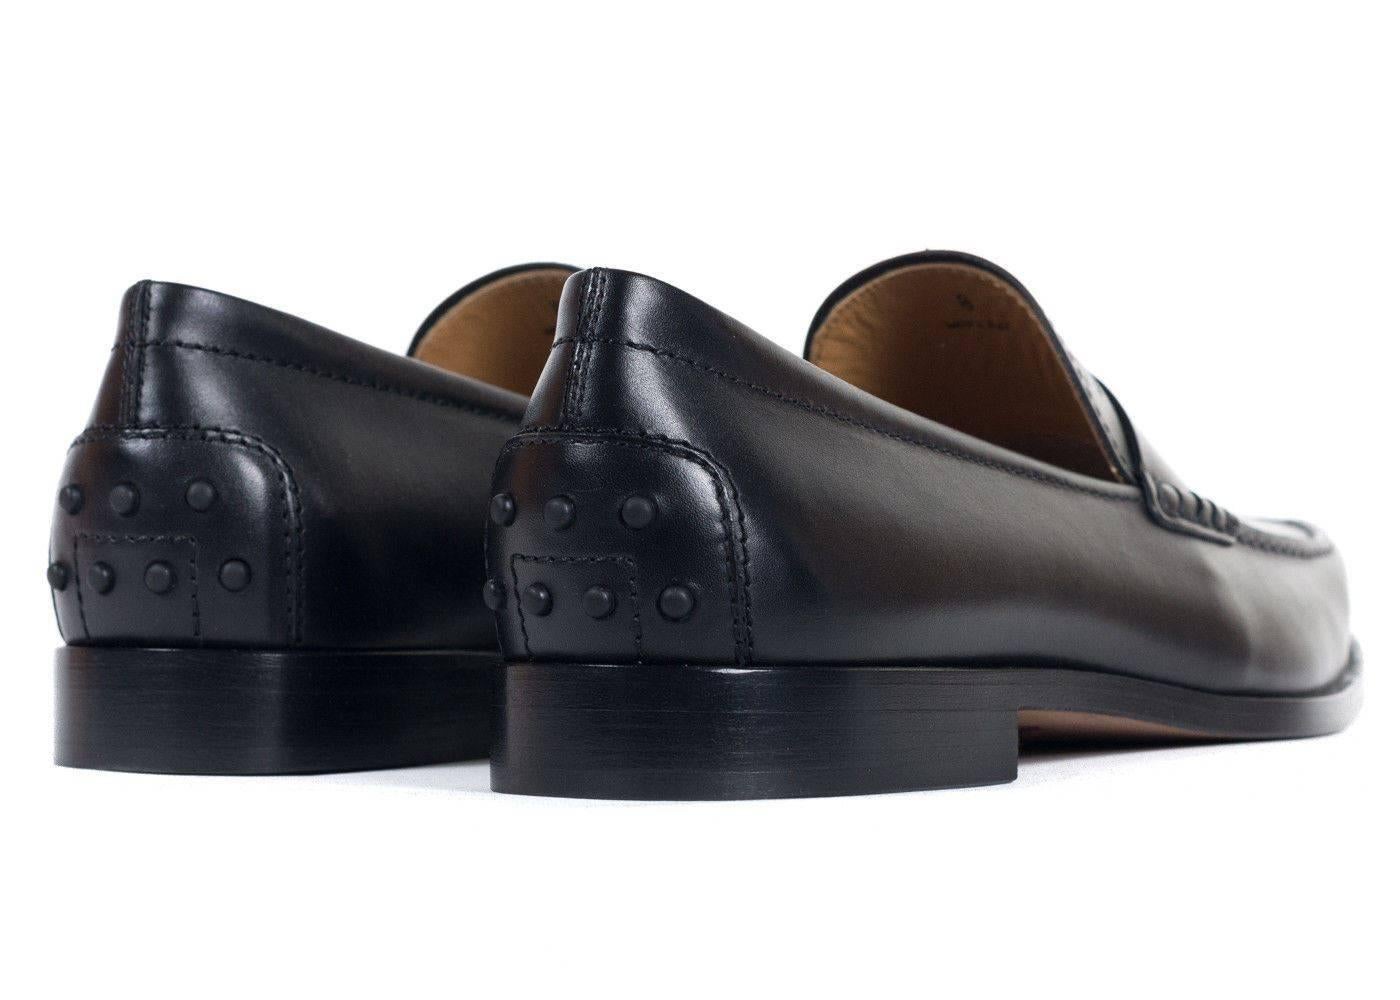 Brand New Tod's Men's Loafers
Original Box & Dust Bag Included
Retails in Stores & Online for $495
Size UK7 / US8 
All Shoes are in UK Sizing
 

Tod's classic penny loafers crafted in black calfskin leather for an ultra smooth look to these shoes.